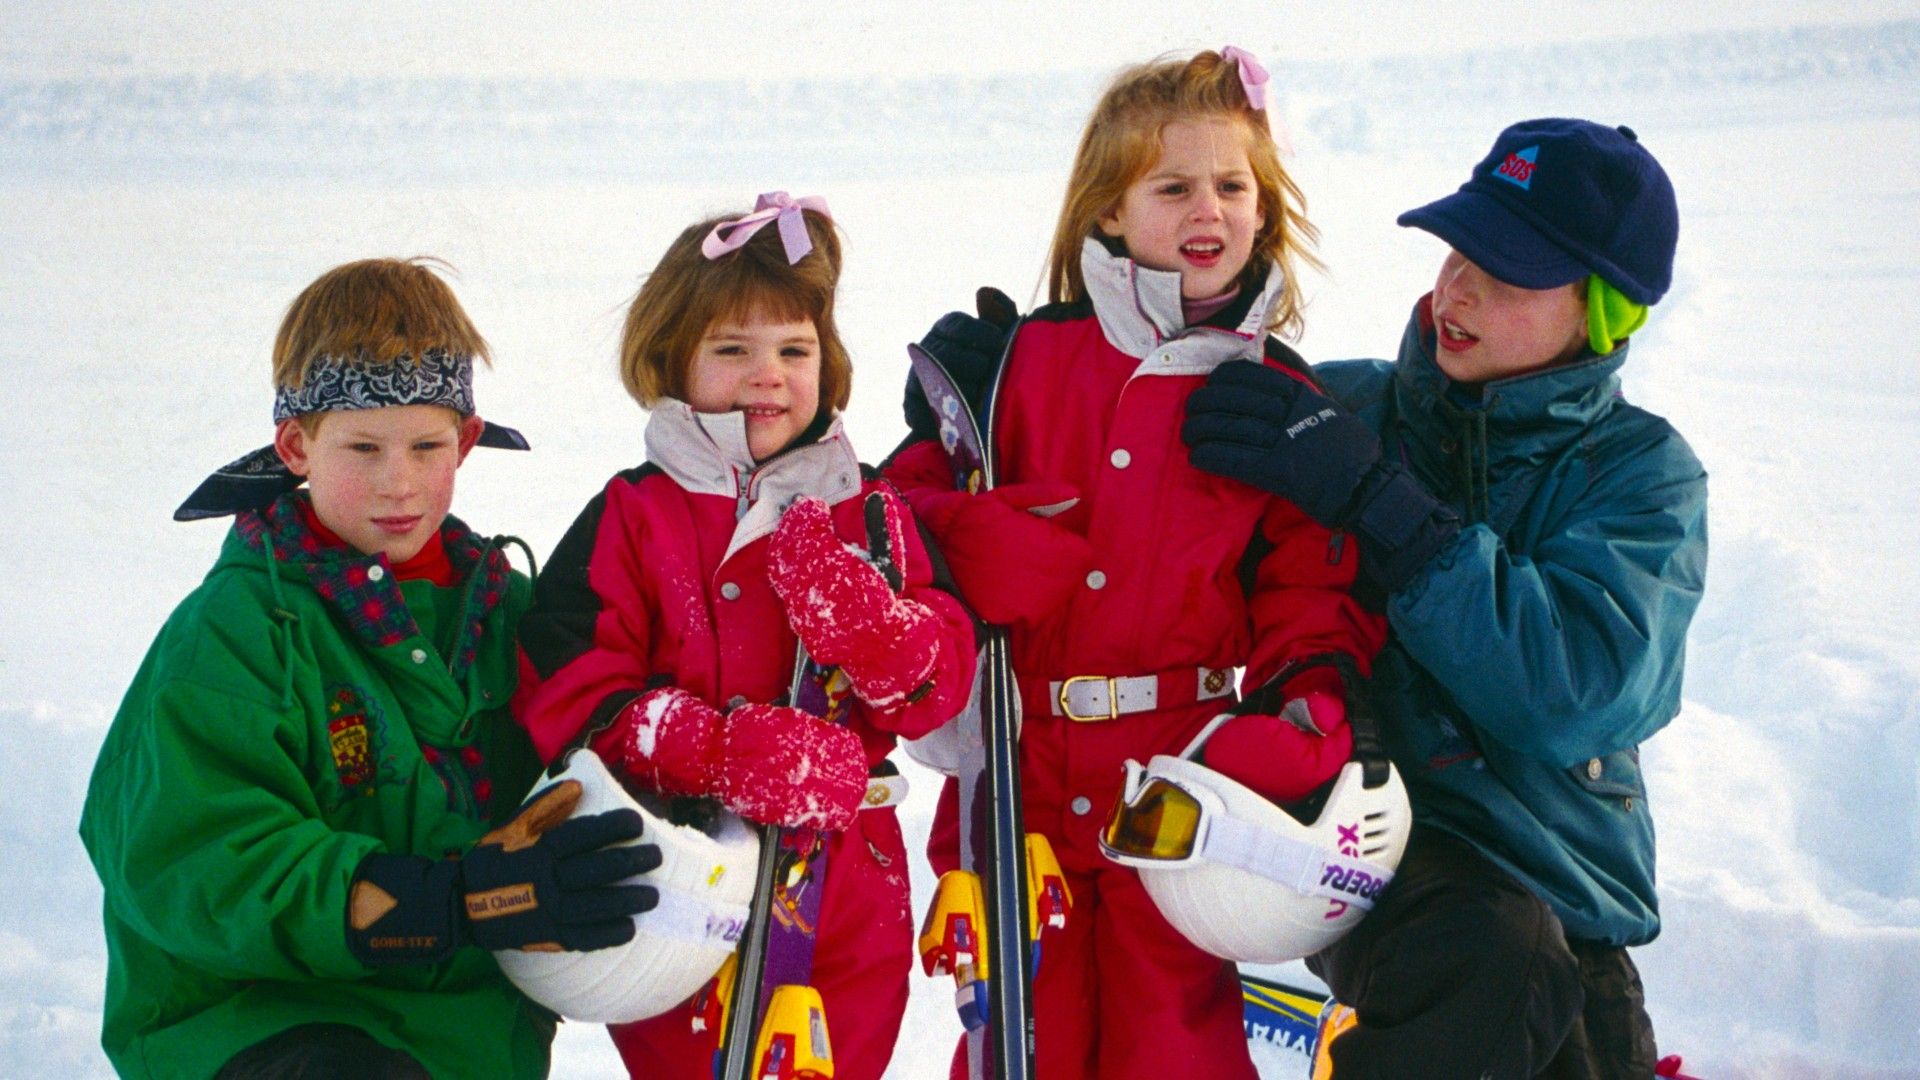 <p>                     The royals sharing the trait of being sporty is something that definitely strengthens their bond, and it seemingly starts from a young age.                   </p>                                      <p>                     In a heart-warming photo capturing the closeness between cousins, Princes William and Harry enjoy a family vacation to the slopes with their cousins, Princesses Beatrice and Eugenie.                   </p>                                      <p>                     It's especially heartening to see Prince William step into protective older cousin mode, assisting his cousin with her ski gear.                   </p>